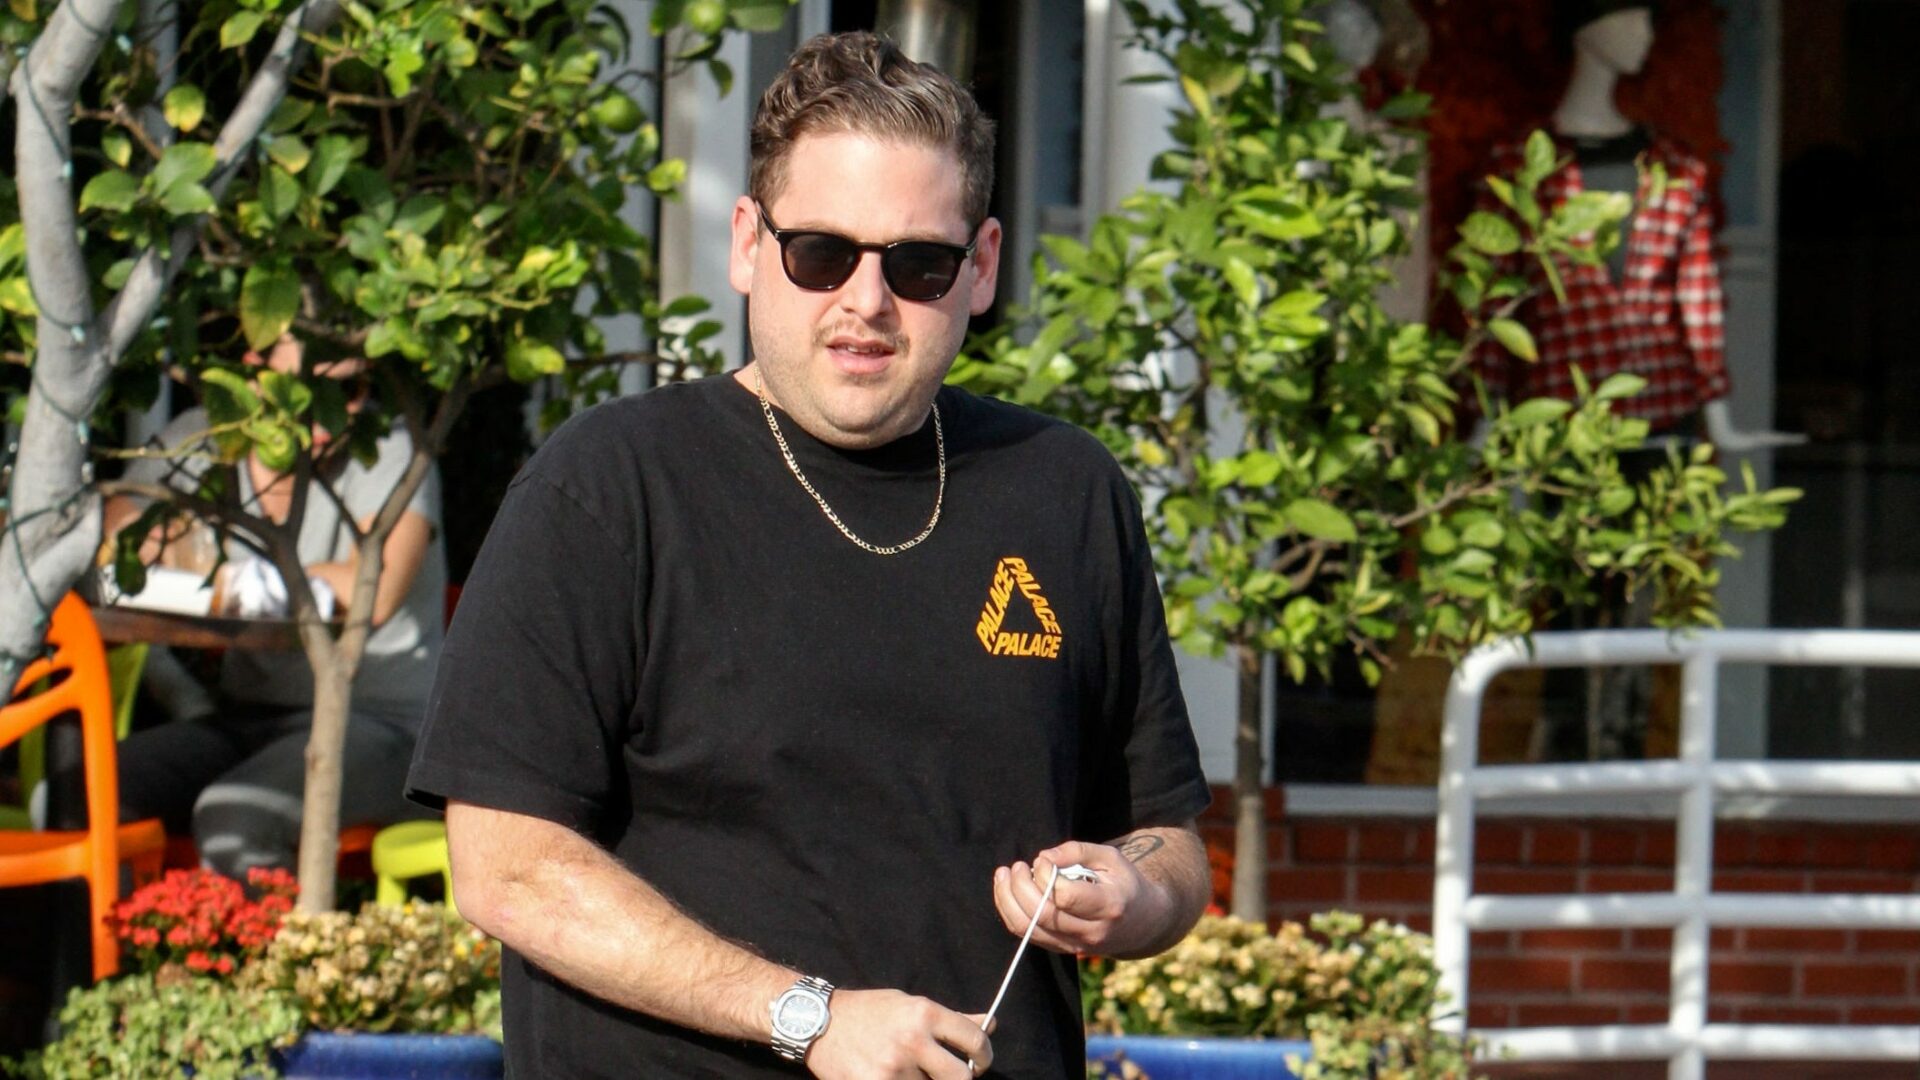 Is Jonah Hill low-key one of Hollywood’s biggest watch collectors?